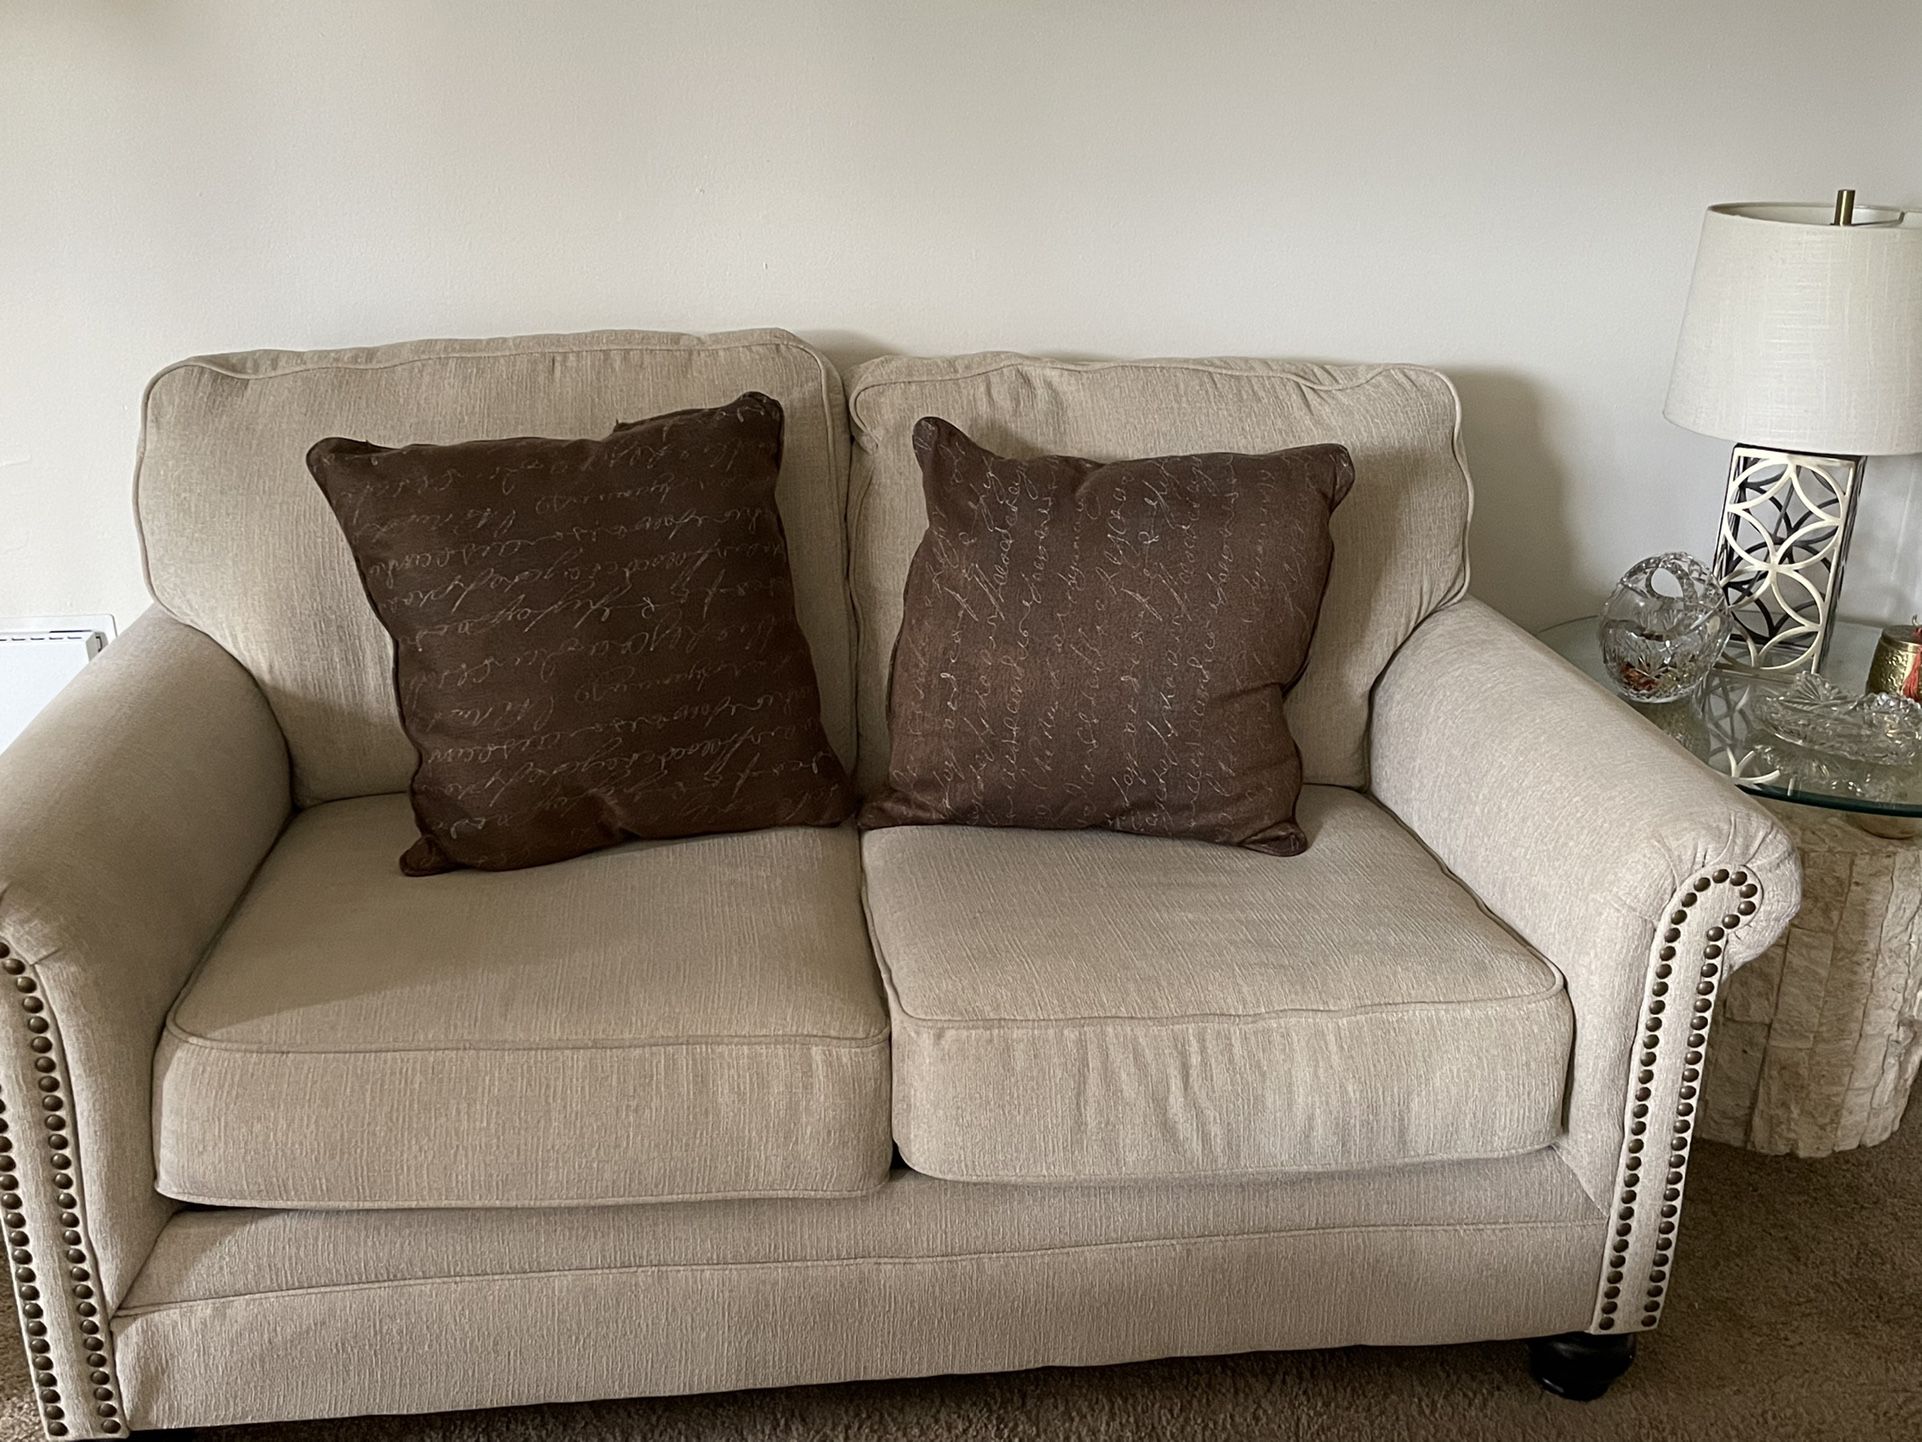 I Sale All Sofa , Loveseat And 2 End Table  ,just Small Stain 